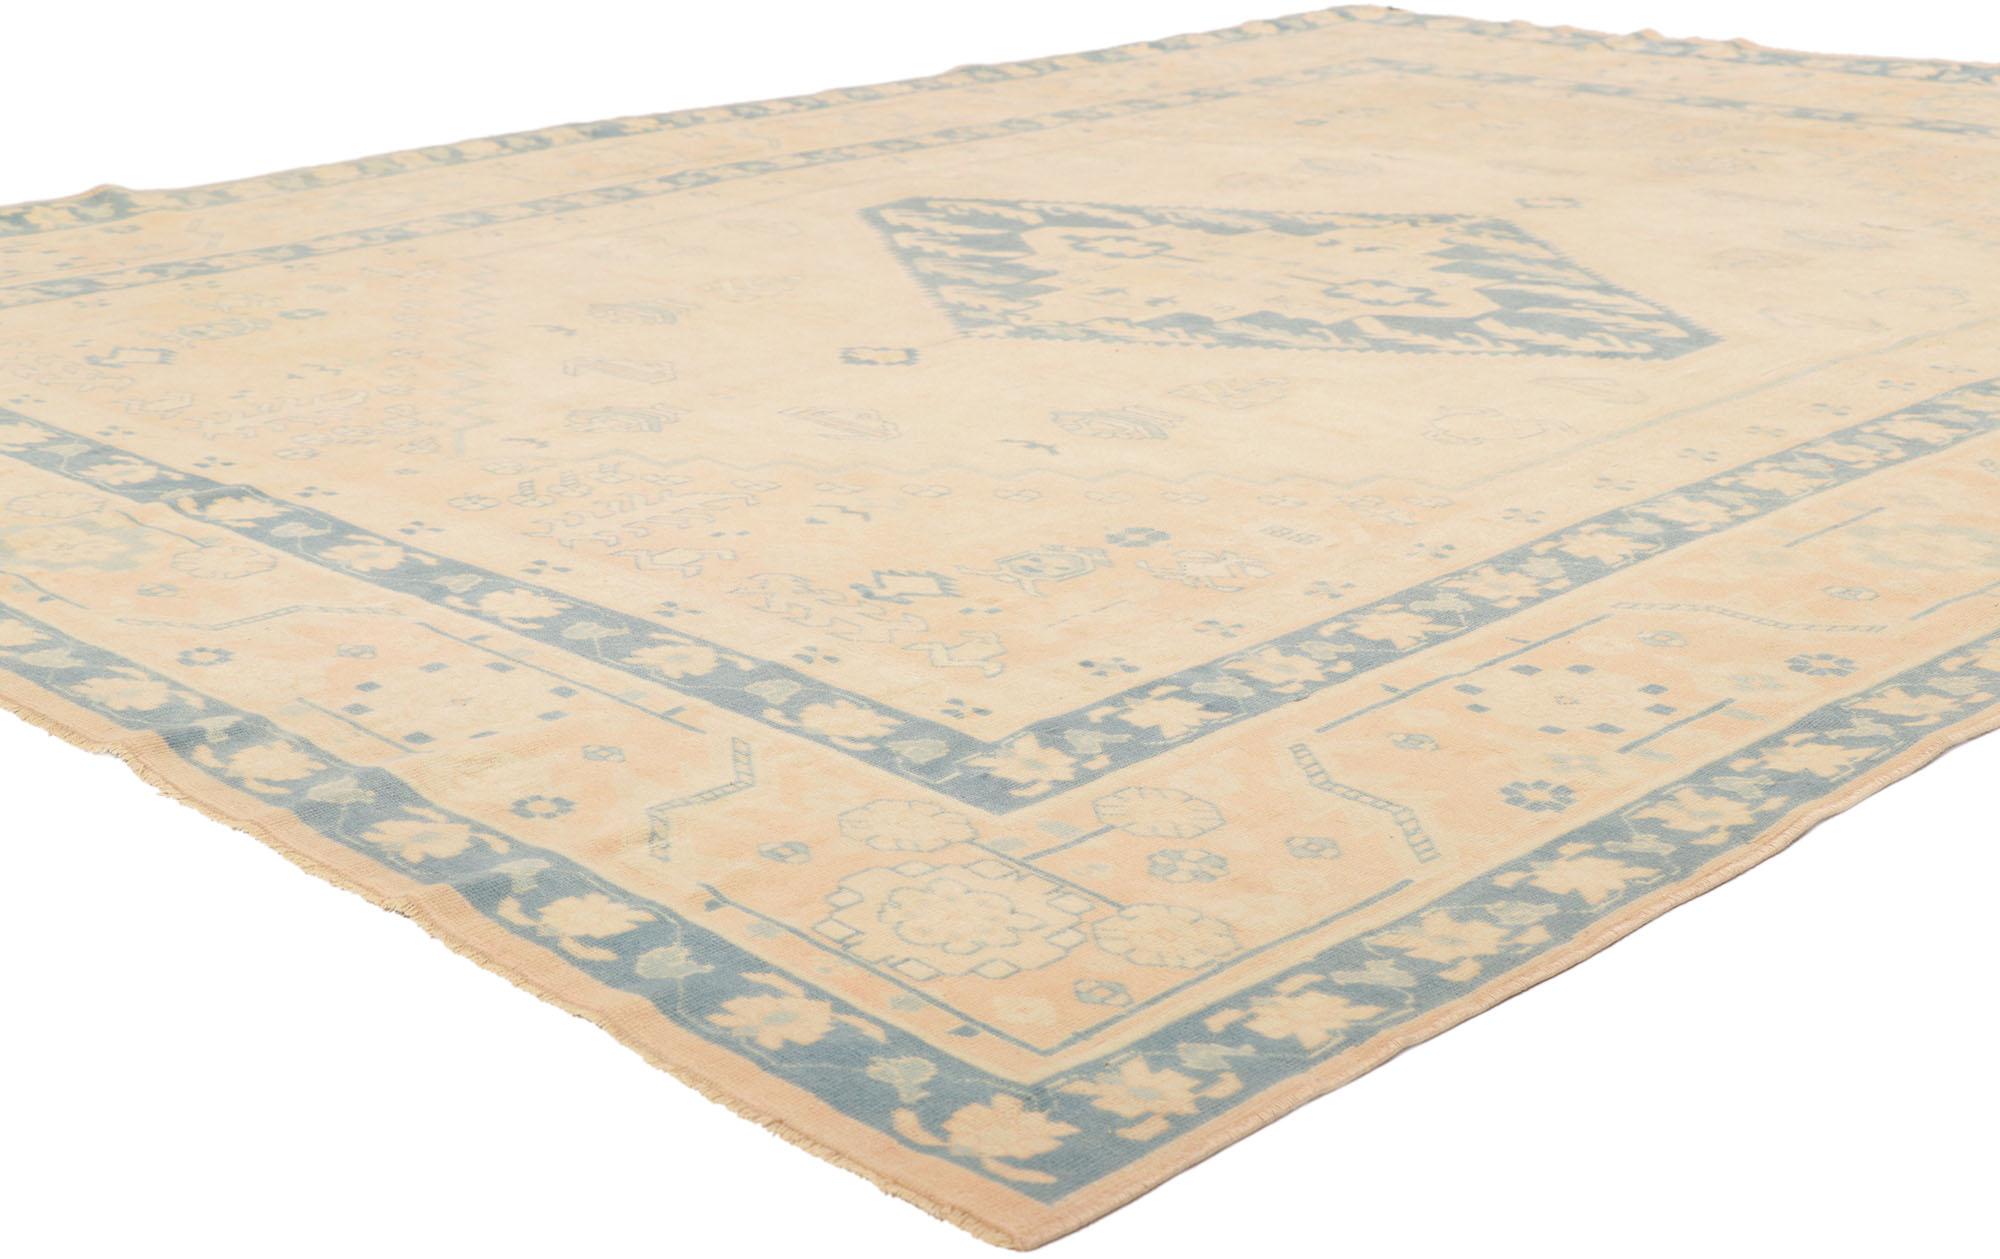 53709 Vintage Turkish Oushak Rug, 07'01 x 09'03.
Soft boho chic meets sophisticated serenity in this hand knotted wool vintage Turkish Oushak rug. The subdued ornamentation and pastel earth-tone colors woven into this piece work together creating a